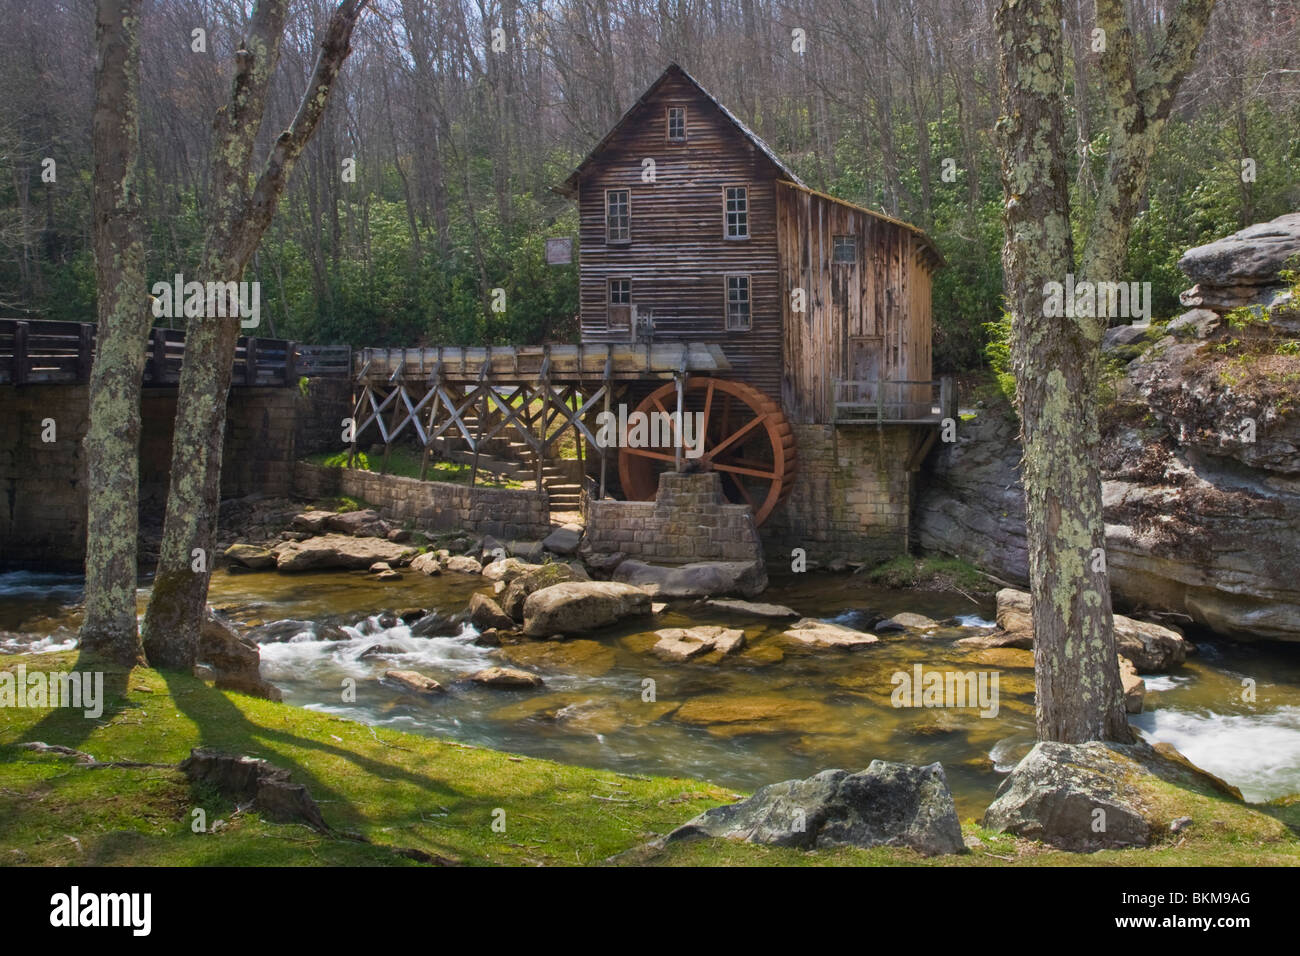 The Glade Creek Grist Mill in Babcock State Park West Virginia in early spring season Stock Photo